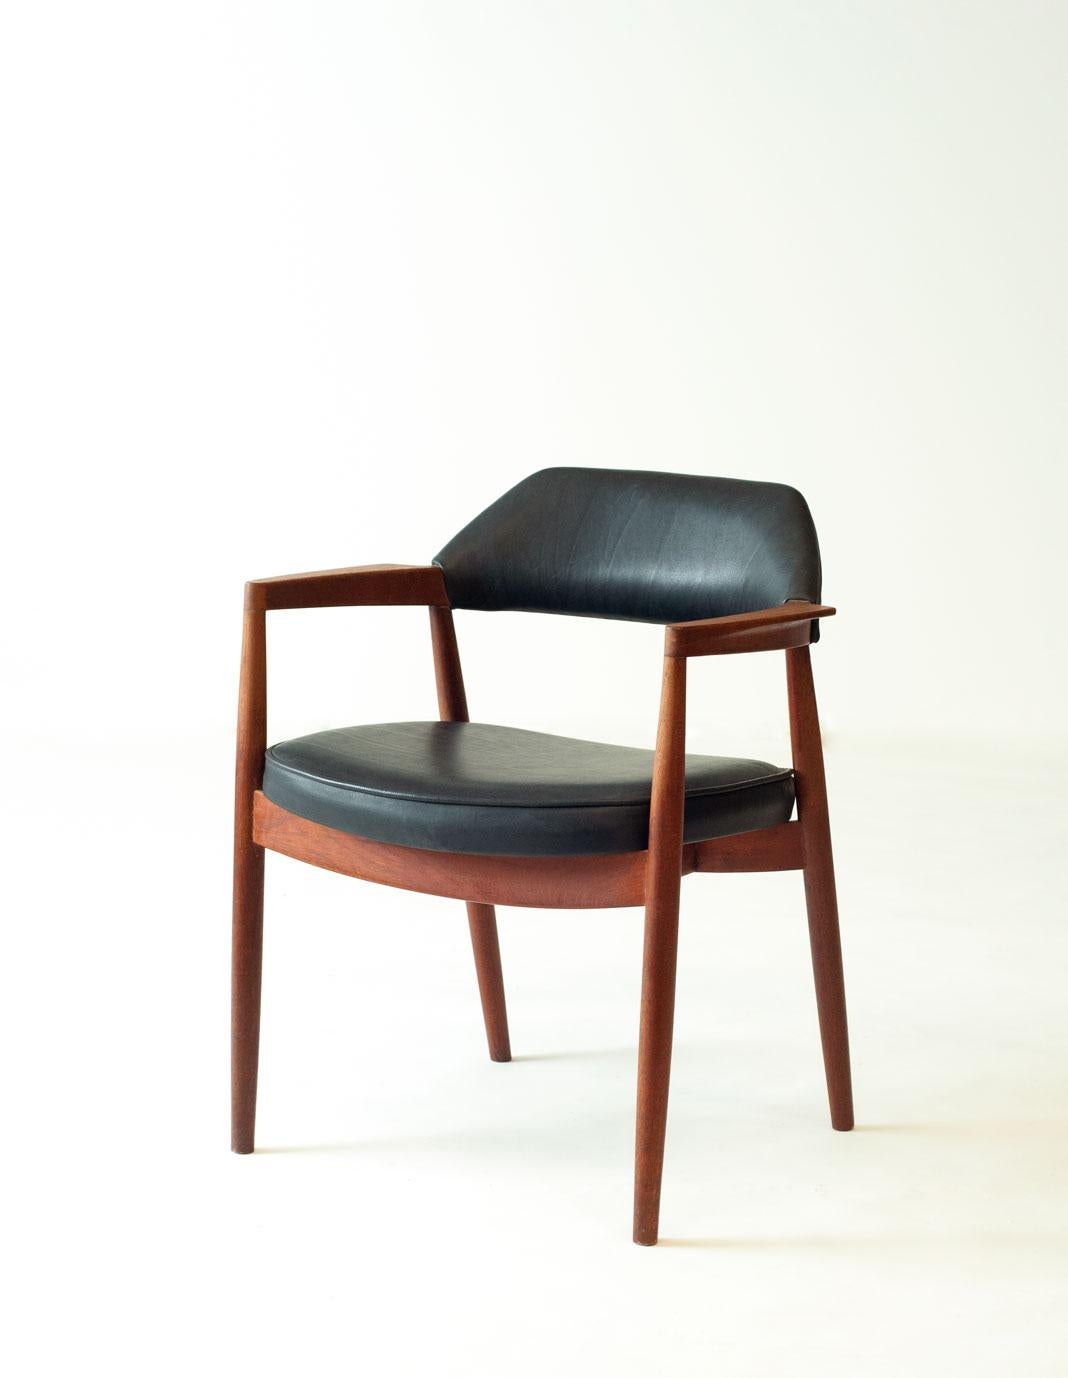 Rare Tove & Edvard Kindt-Larsen teak armchair for Gustav Bertelsen with brand new leather upholstery. 

This was was first shown at the 1958 Copenhagen Cabinetmaker's Guild Exhibition.